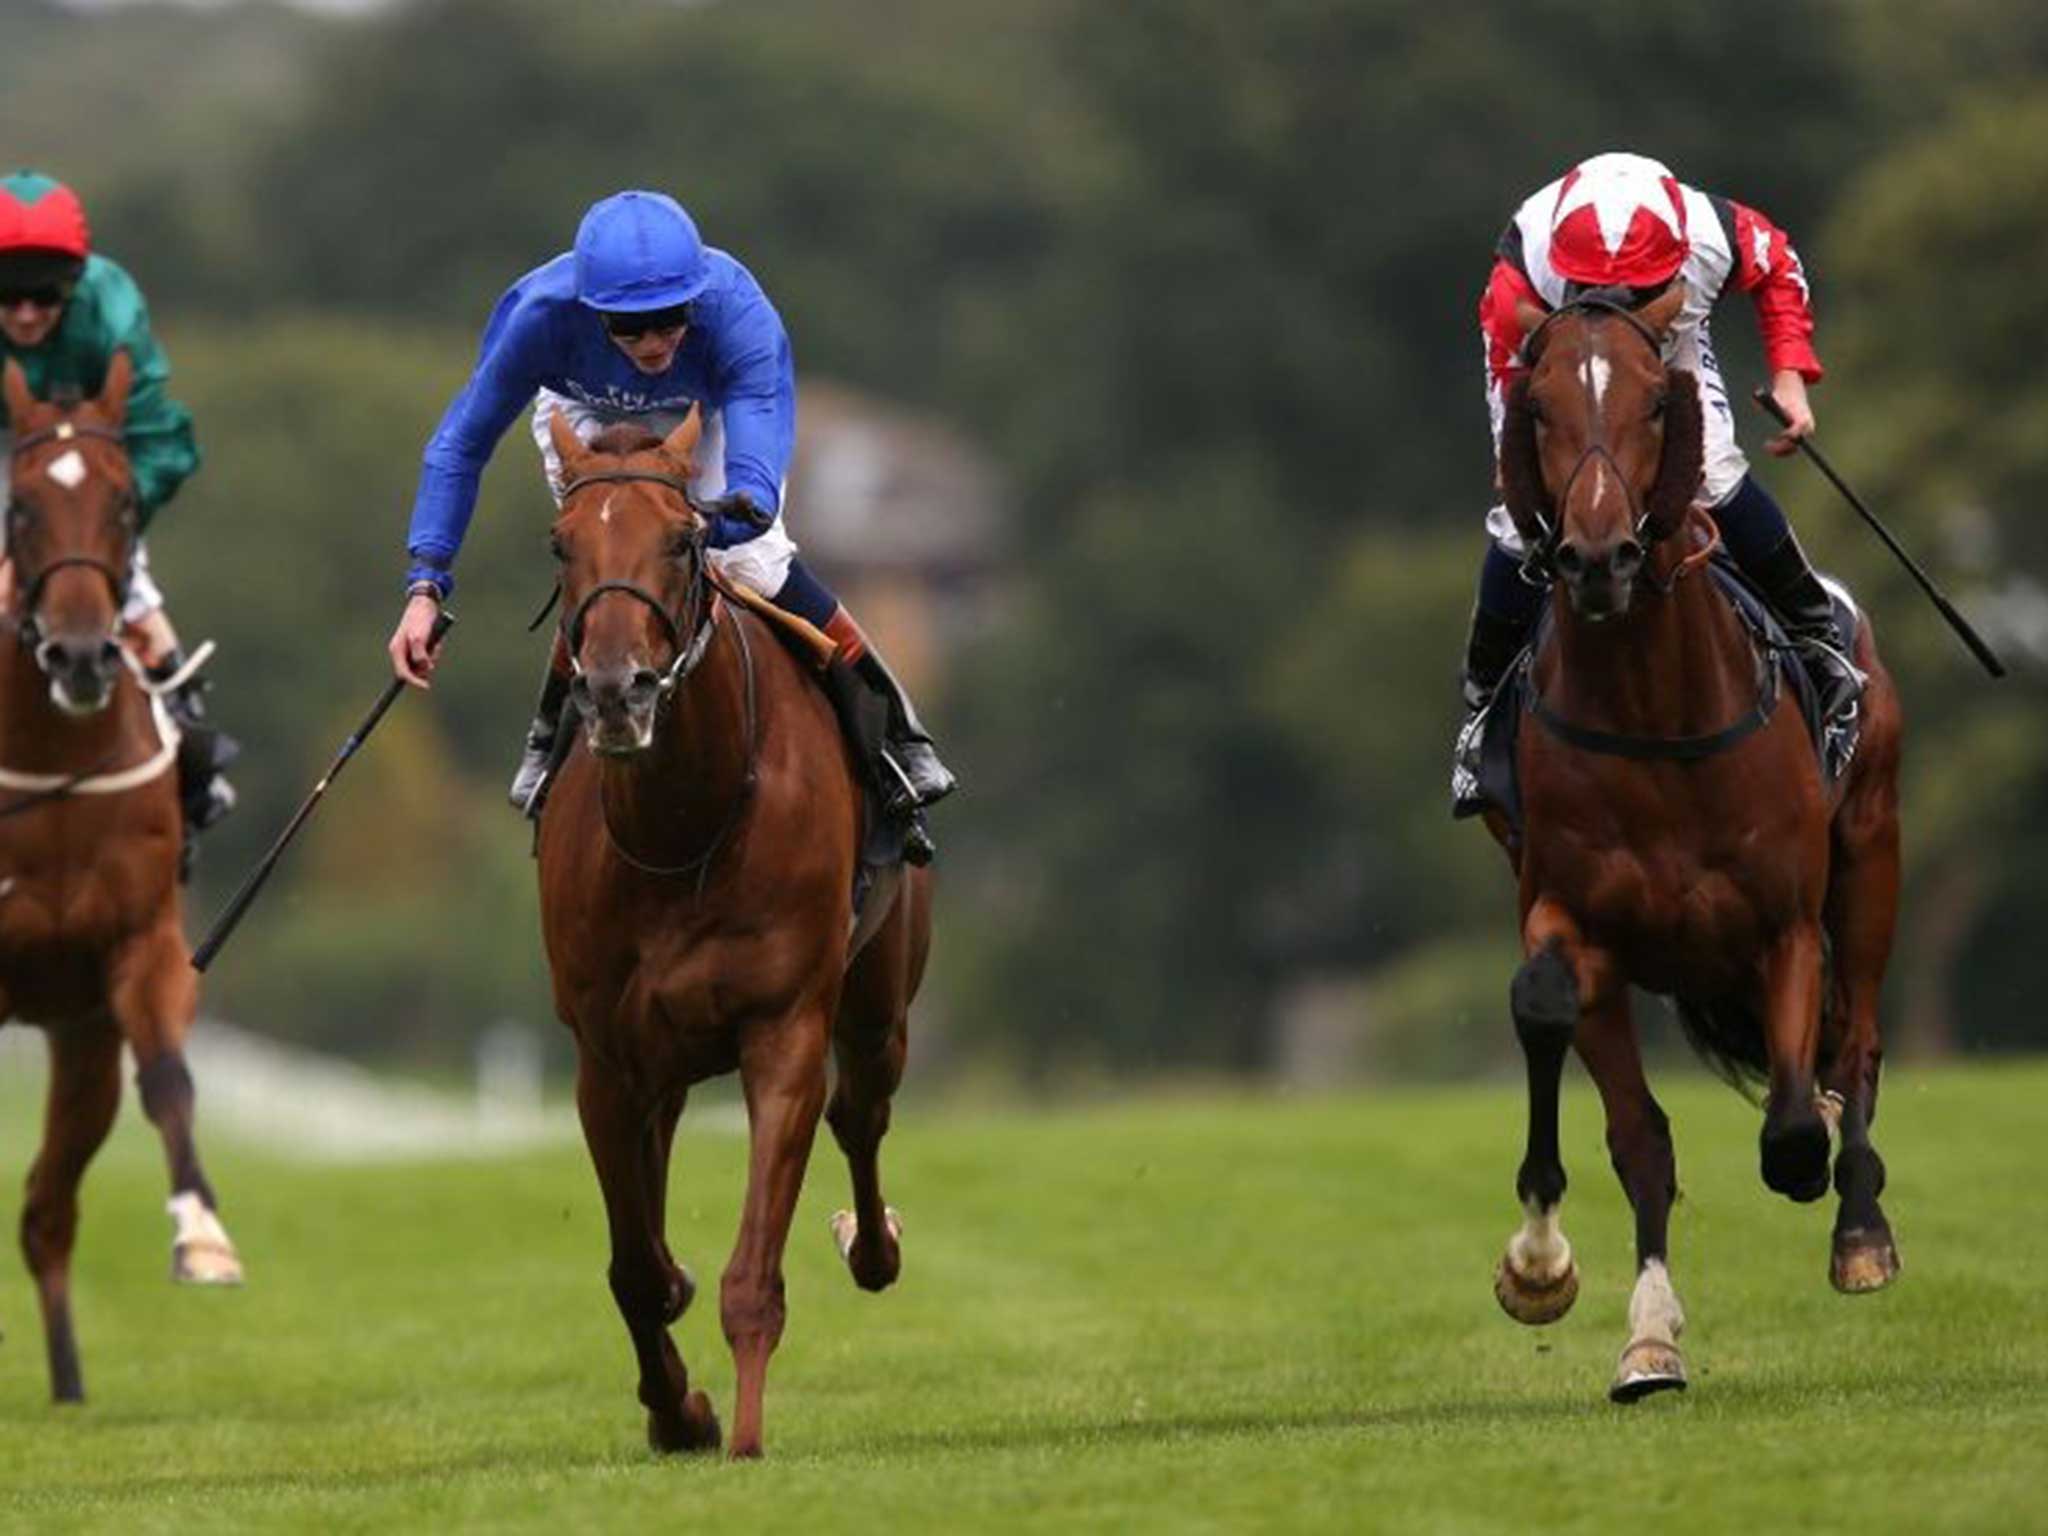 Aktabantay (right) snatched the Solario Stakes at Sandown Park by the width of his whiskers 